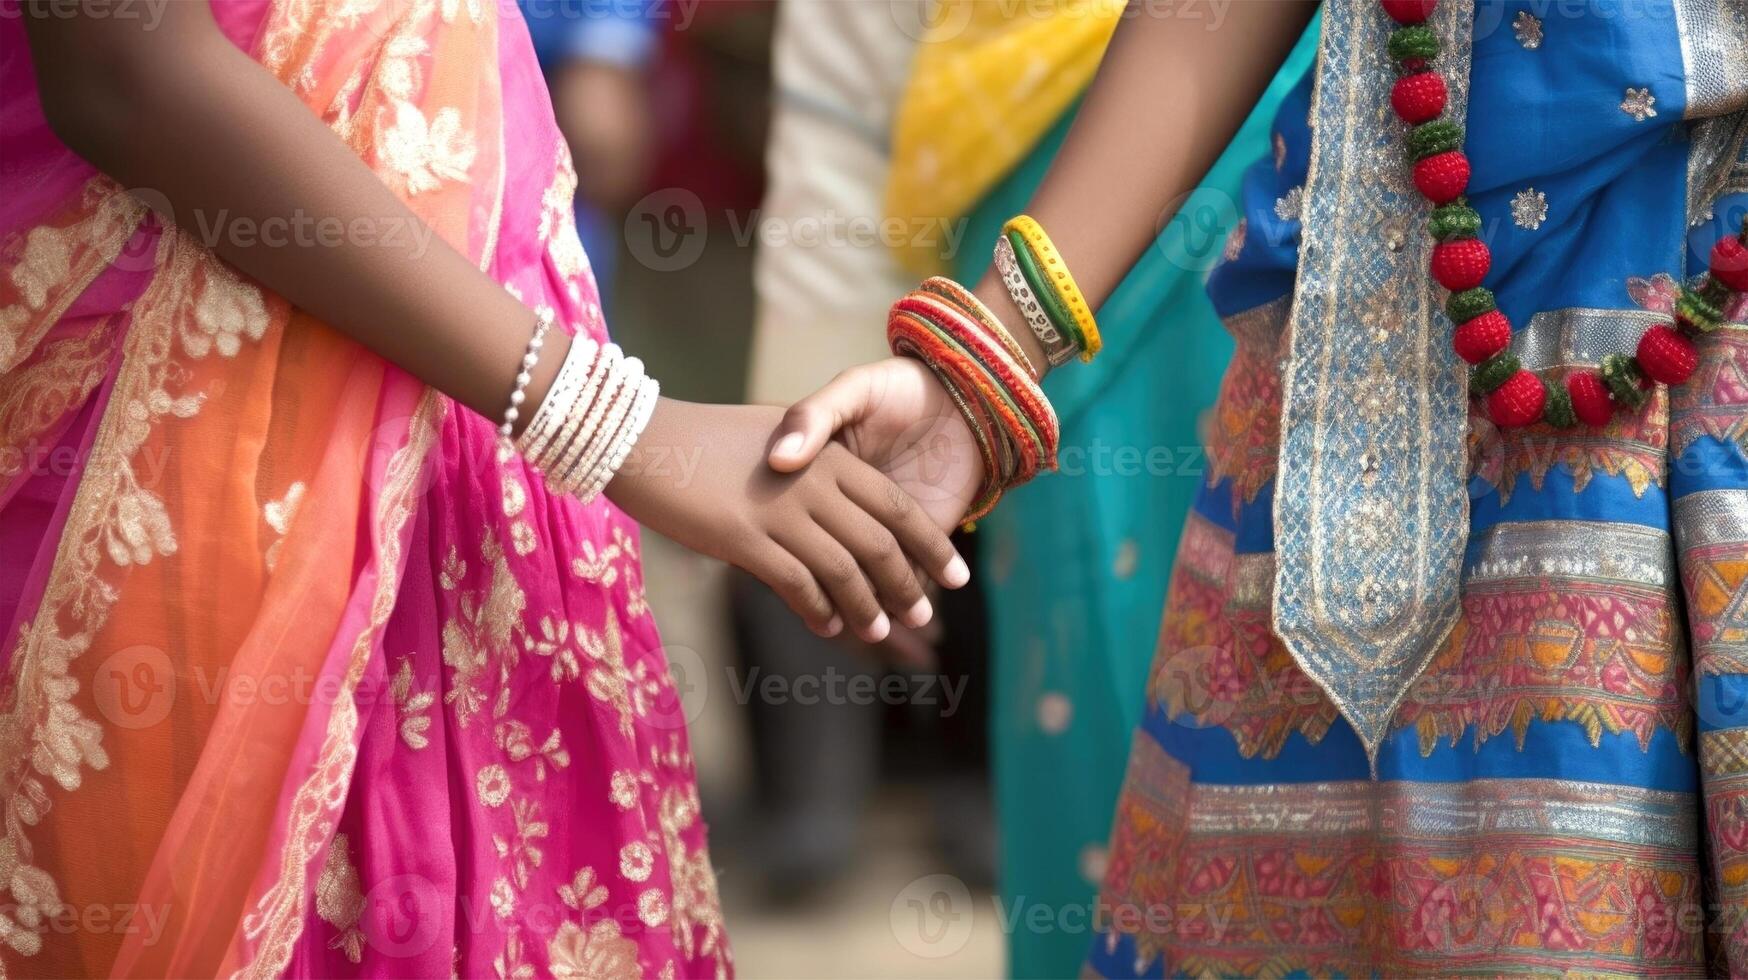 Cropped Image of Friendly or Casual Handshake Between Multicultural Women in Their Traditional Attire. . photo